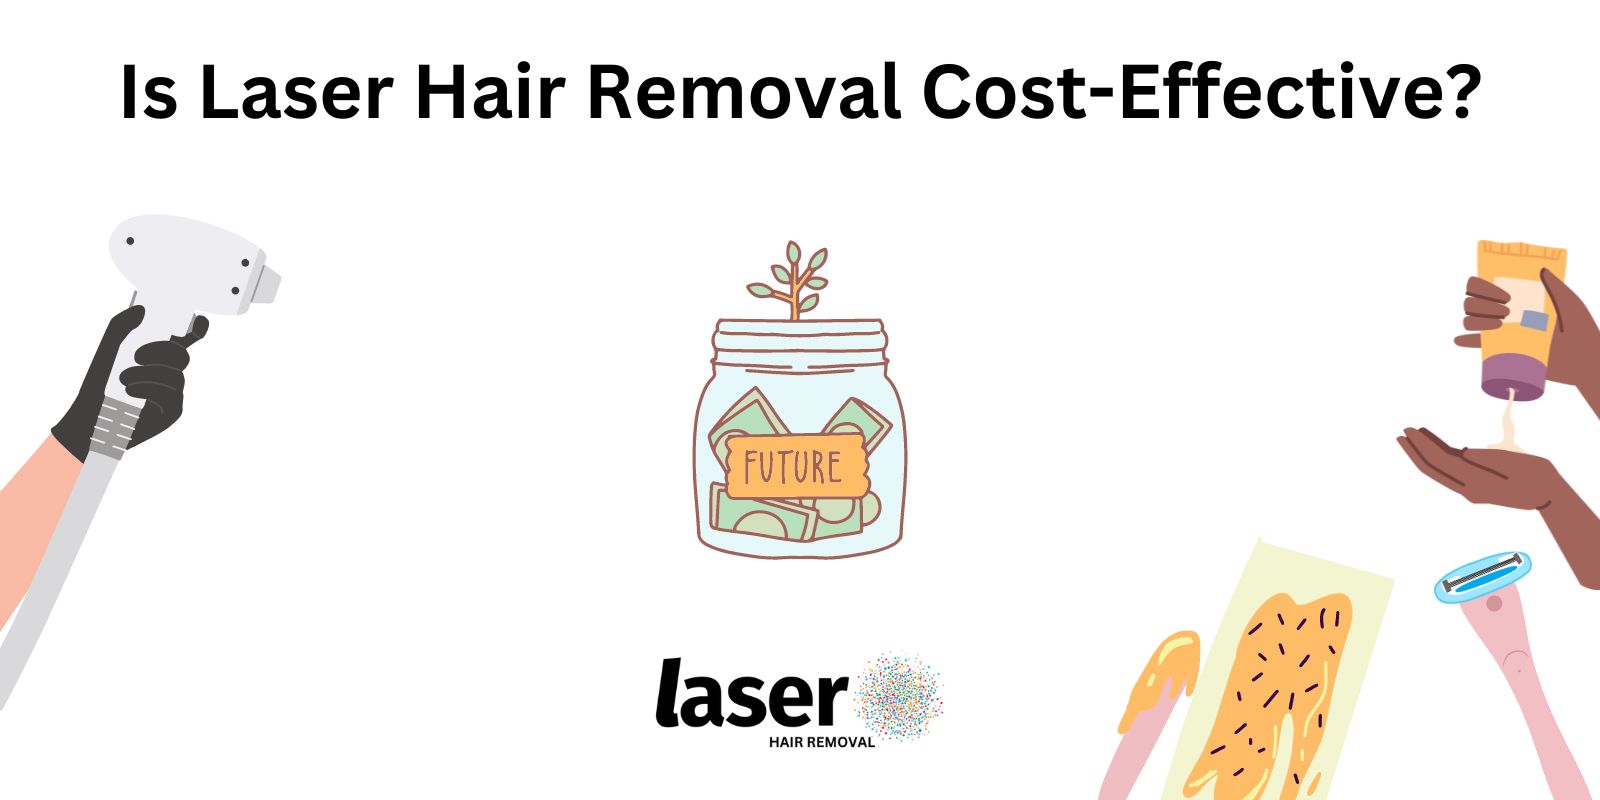 Is Laser Hair Removal Cost-Effective